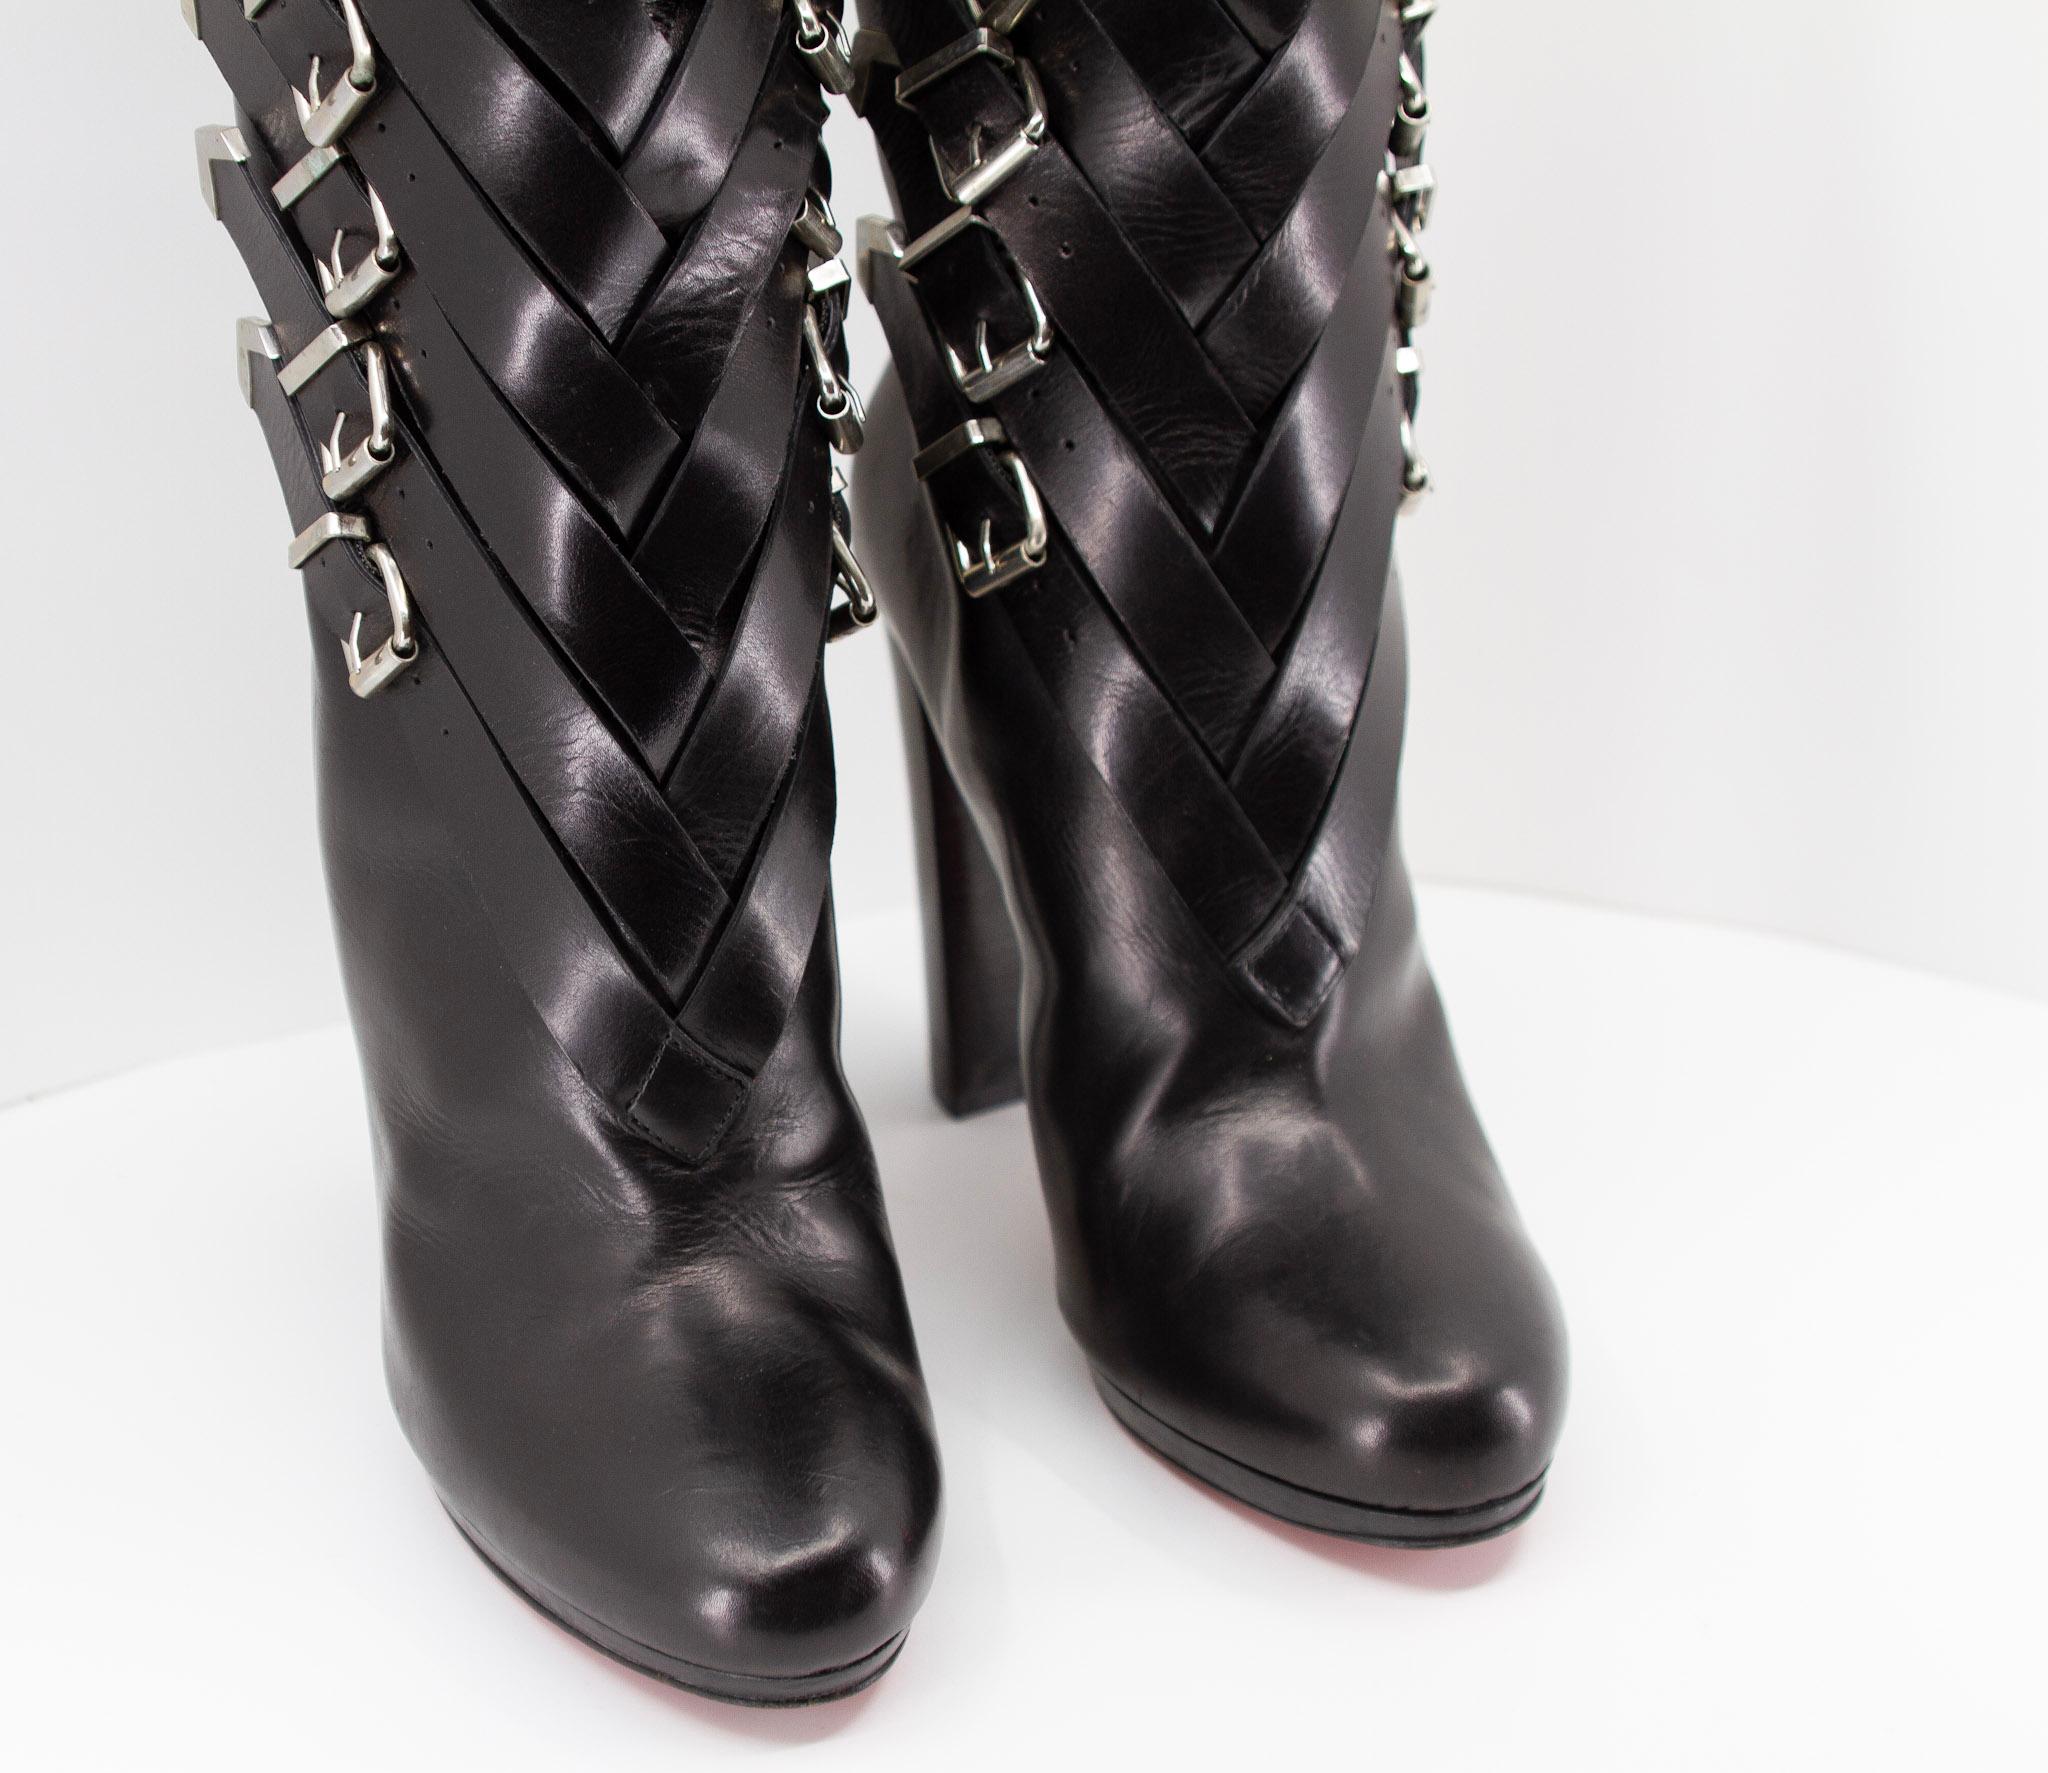 Rare Knee High Christian Louboutin Black Leather Boots For Sale 10